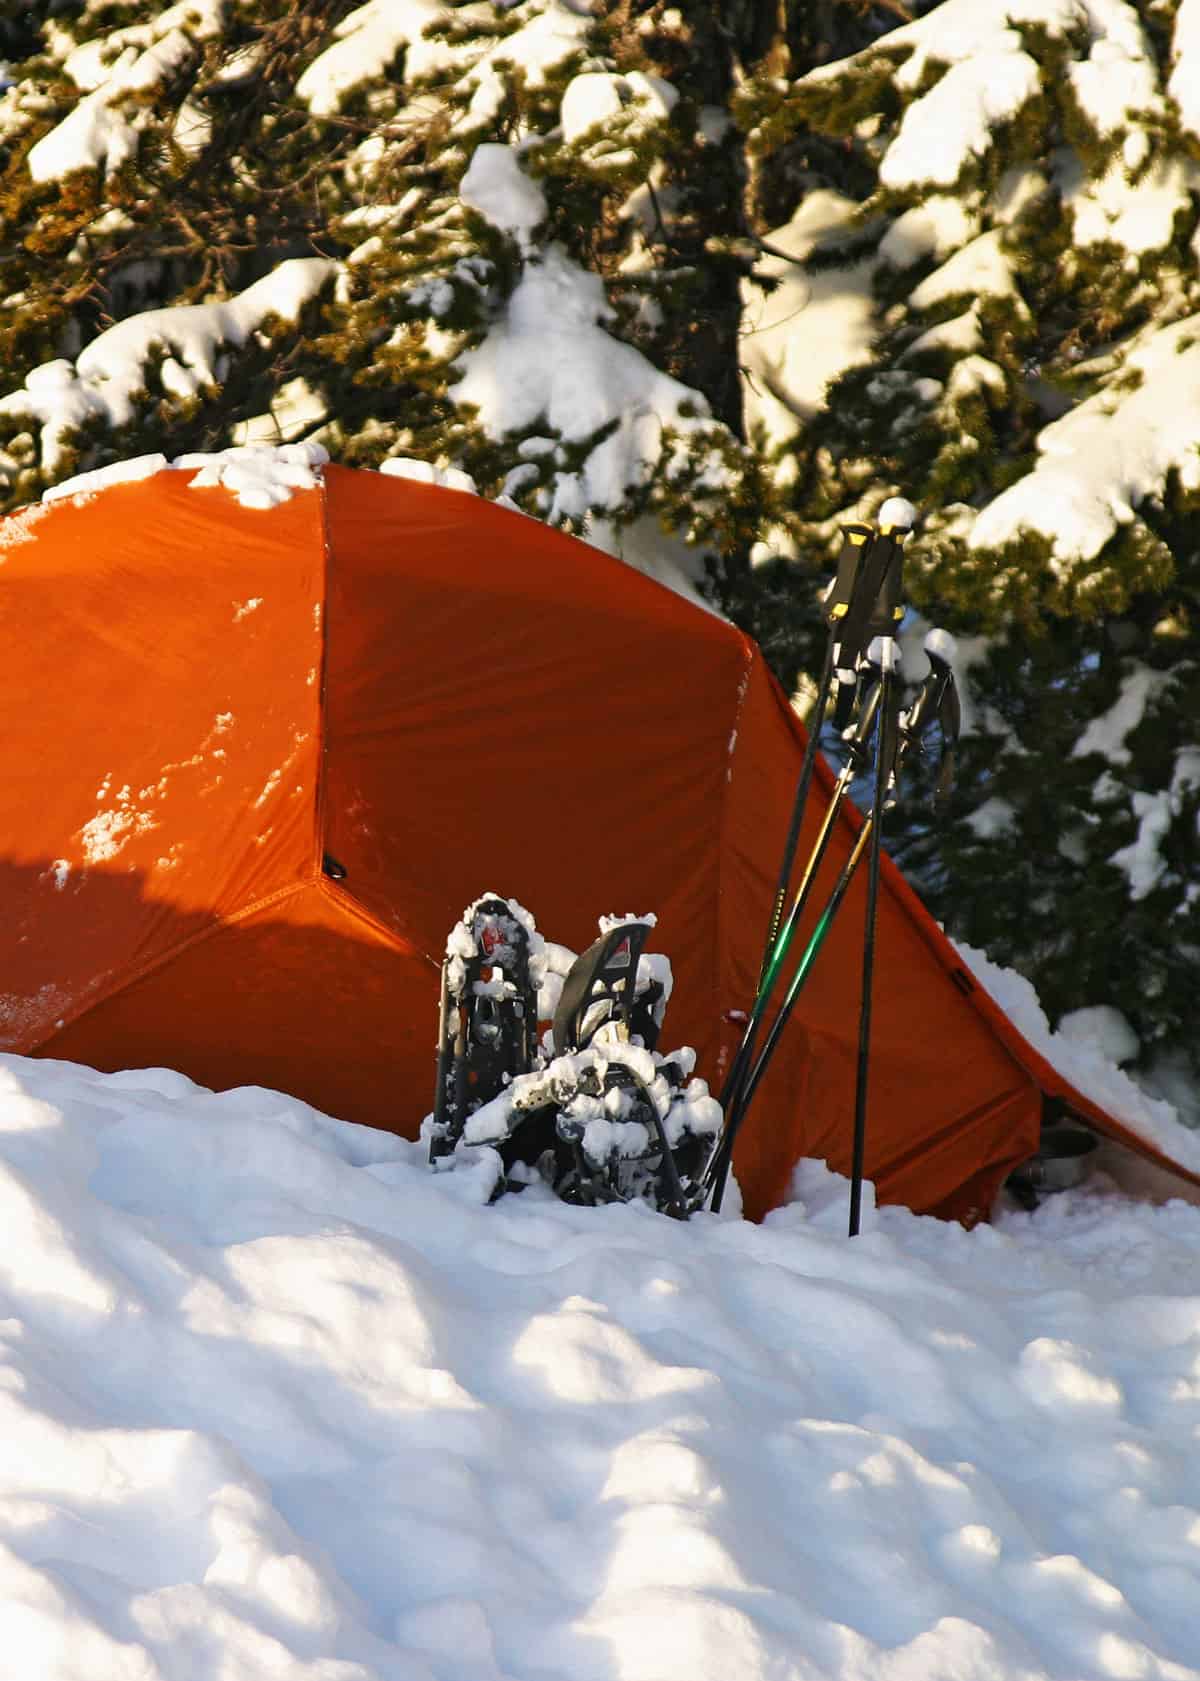 How to Insulate a Tent for Winter Camping 9 Tips (So You Don’t Freeze